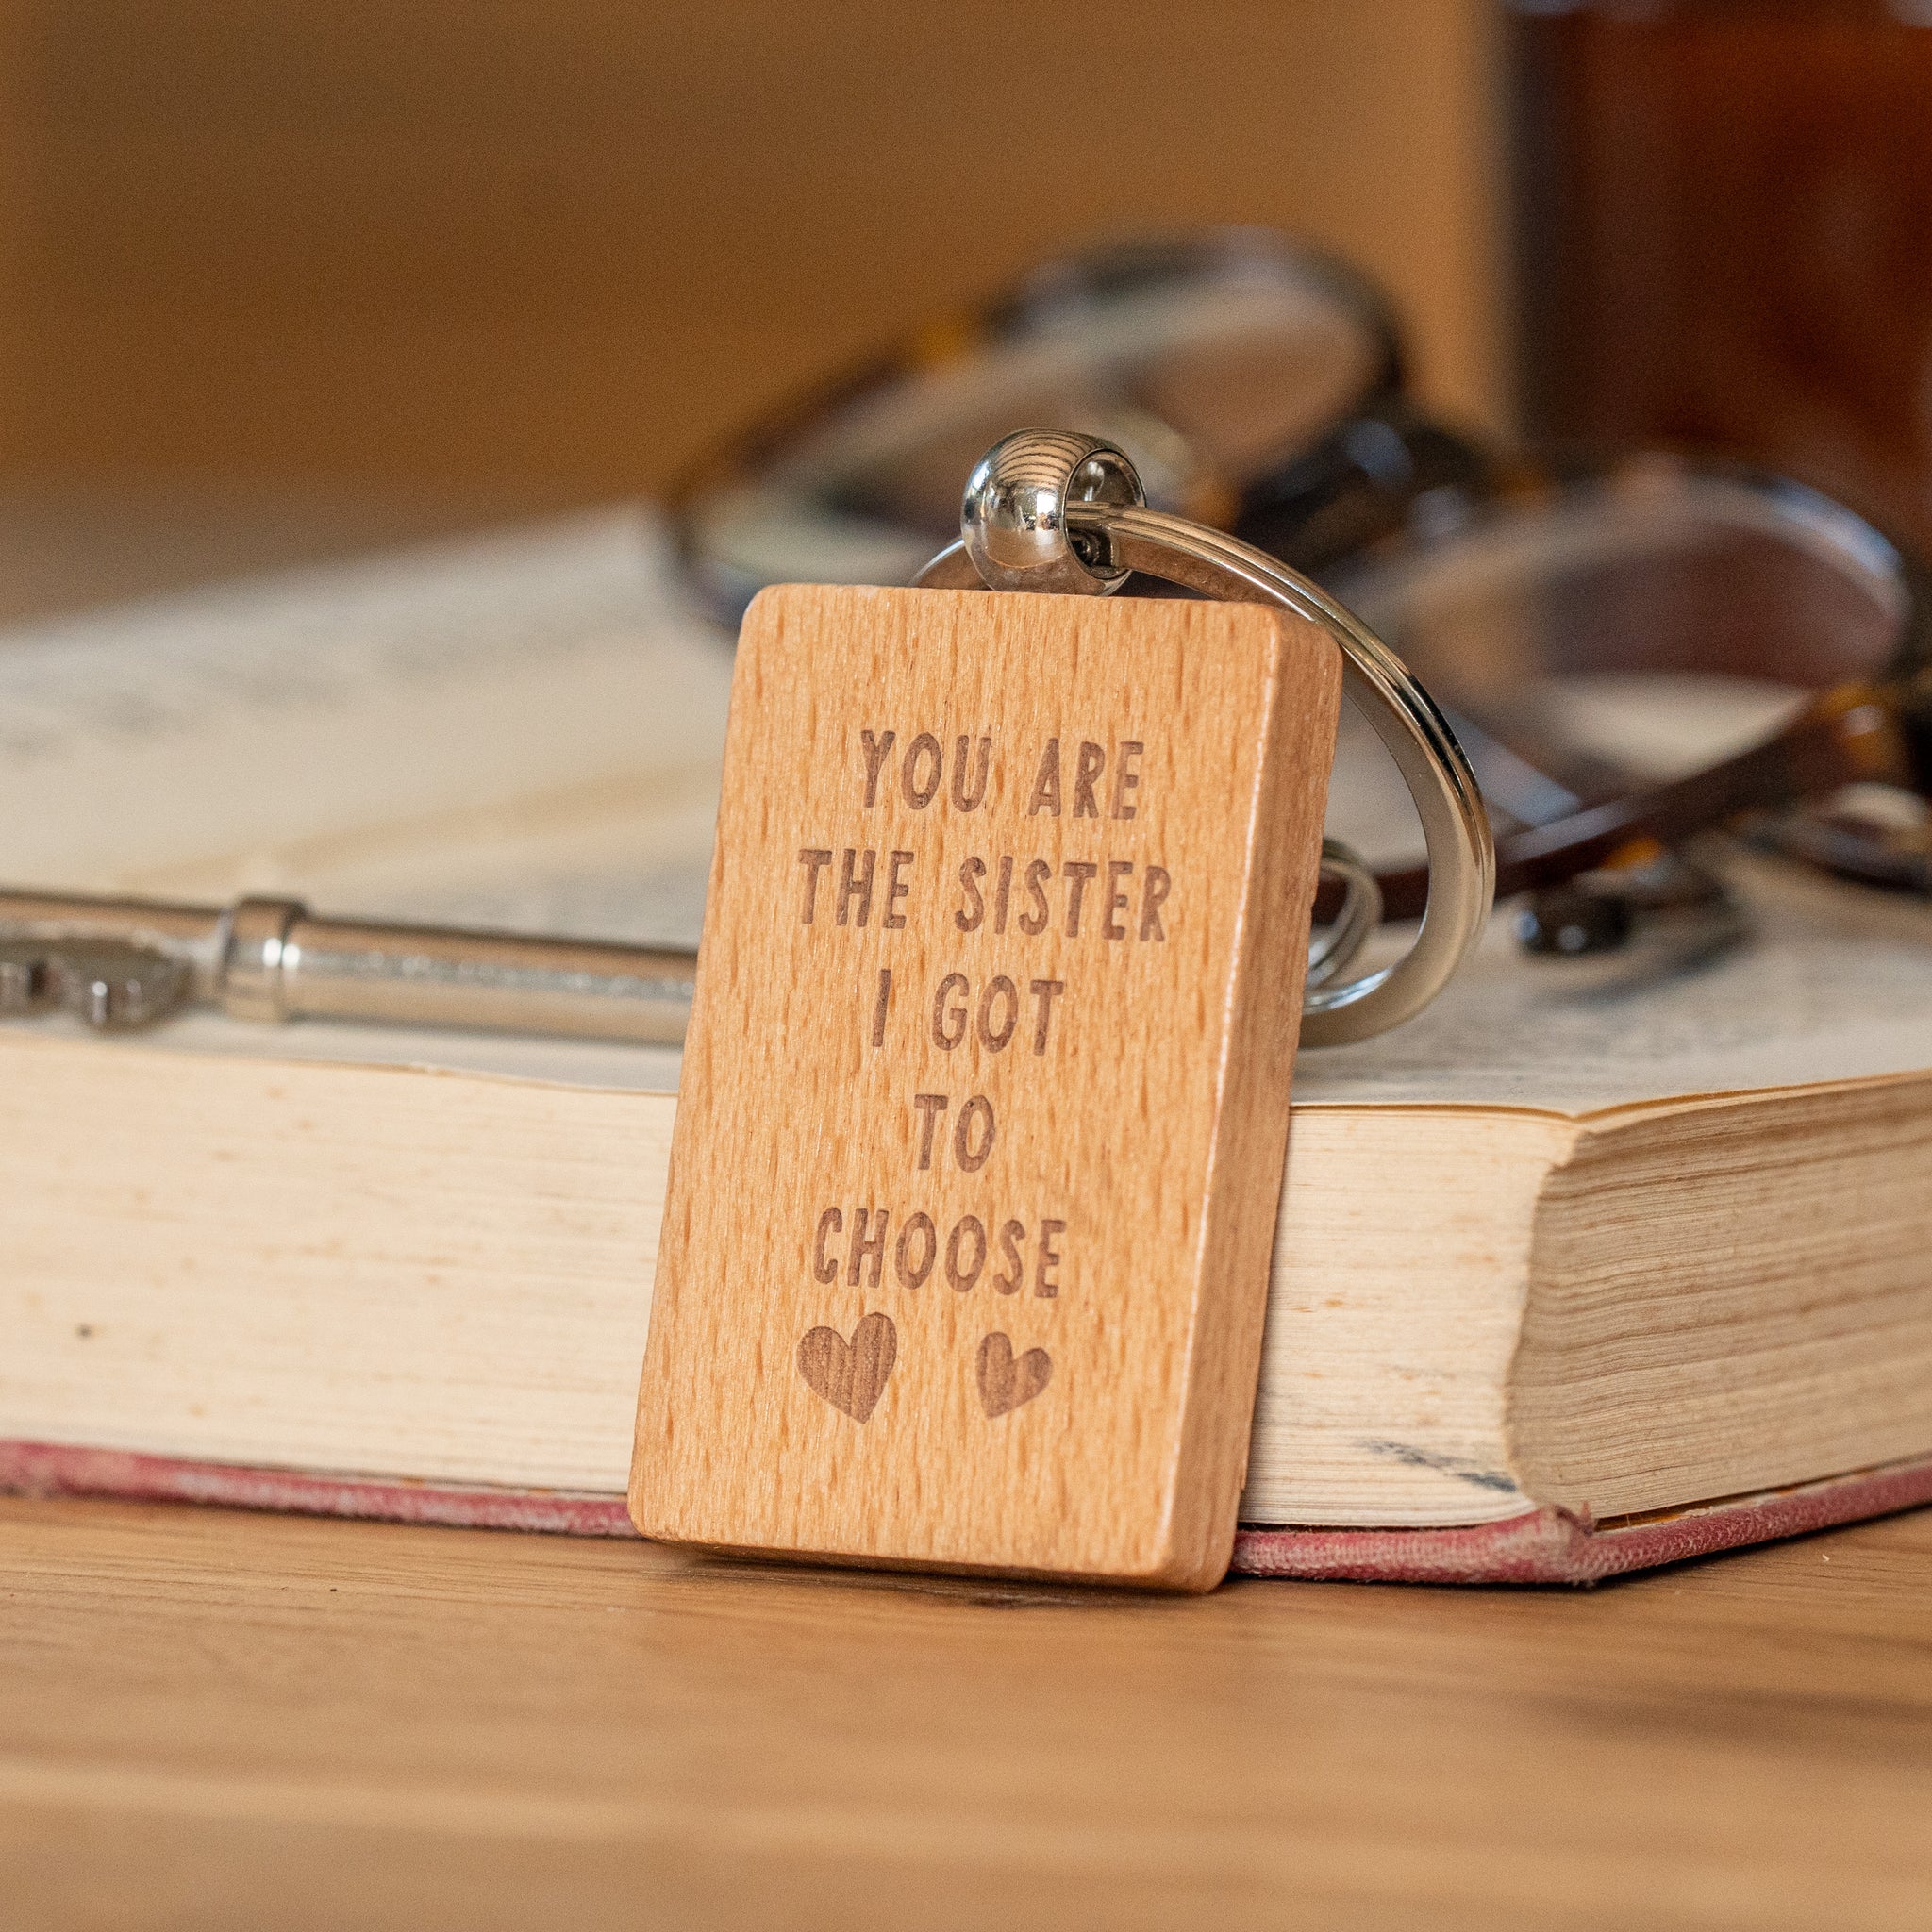 You are the sister I got to choose keyring